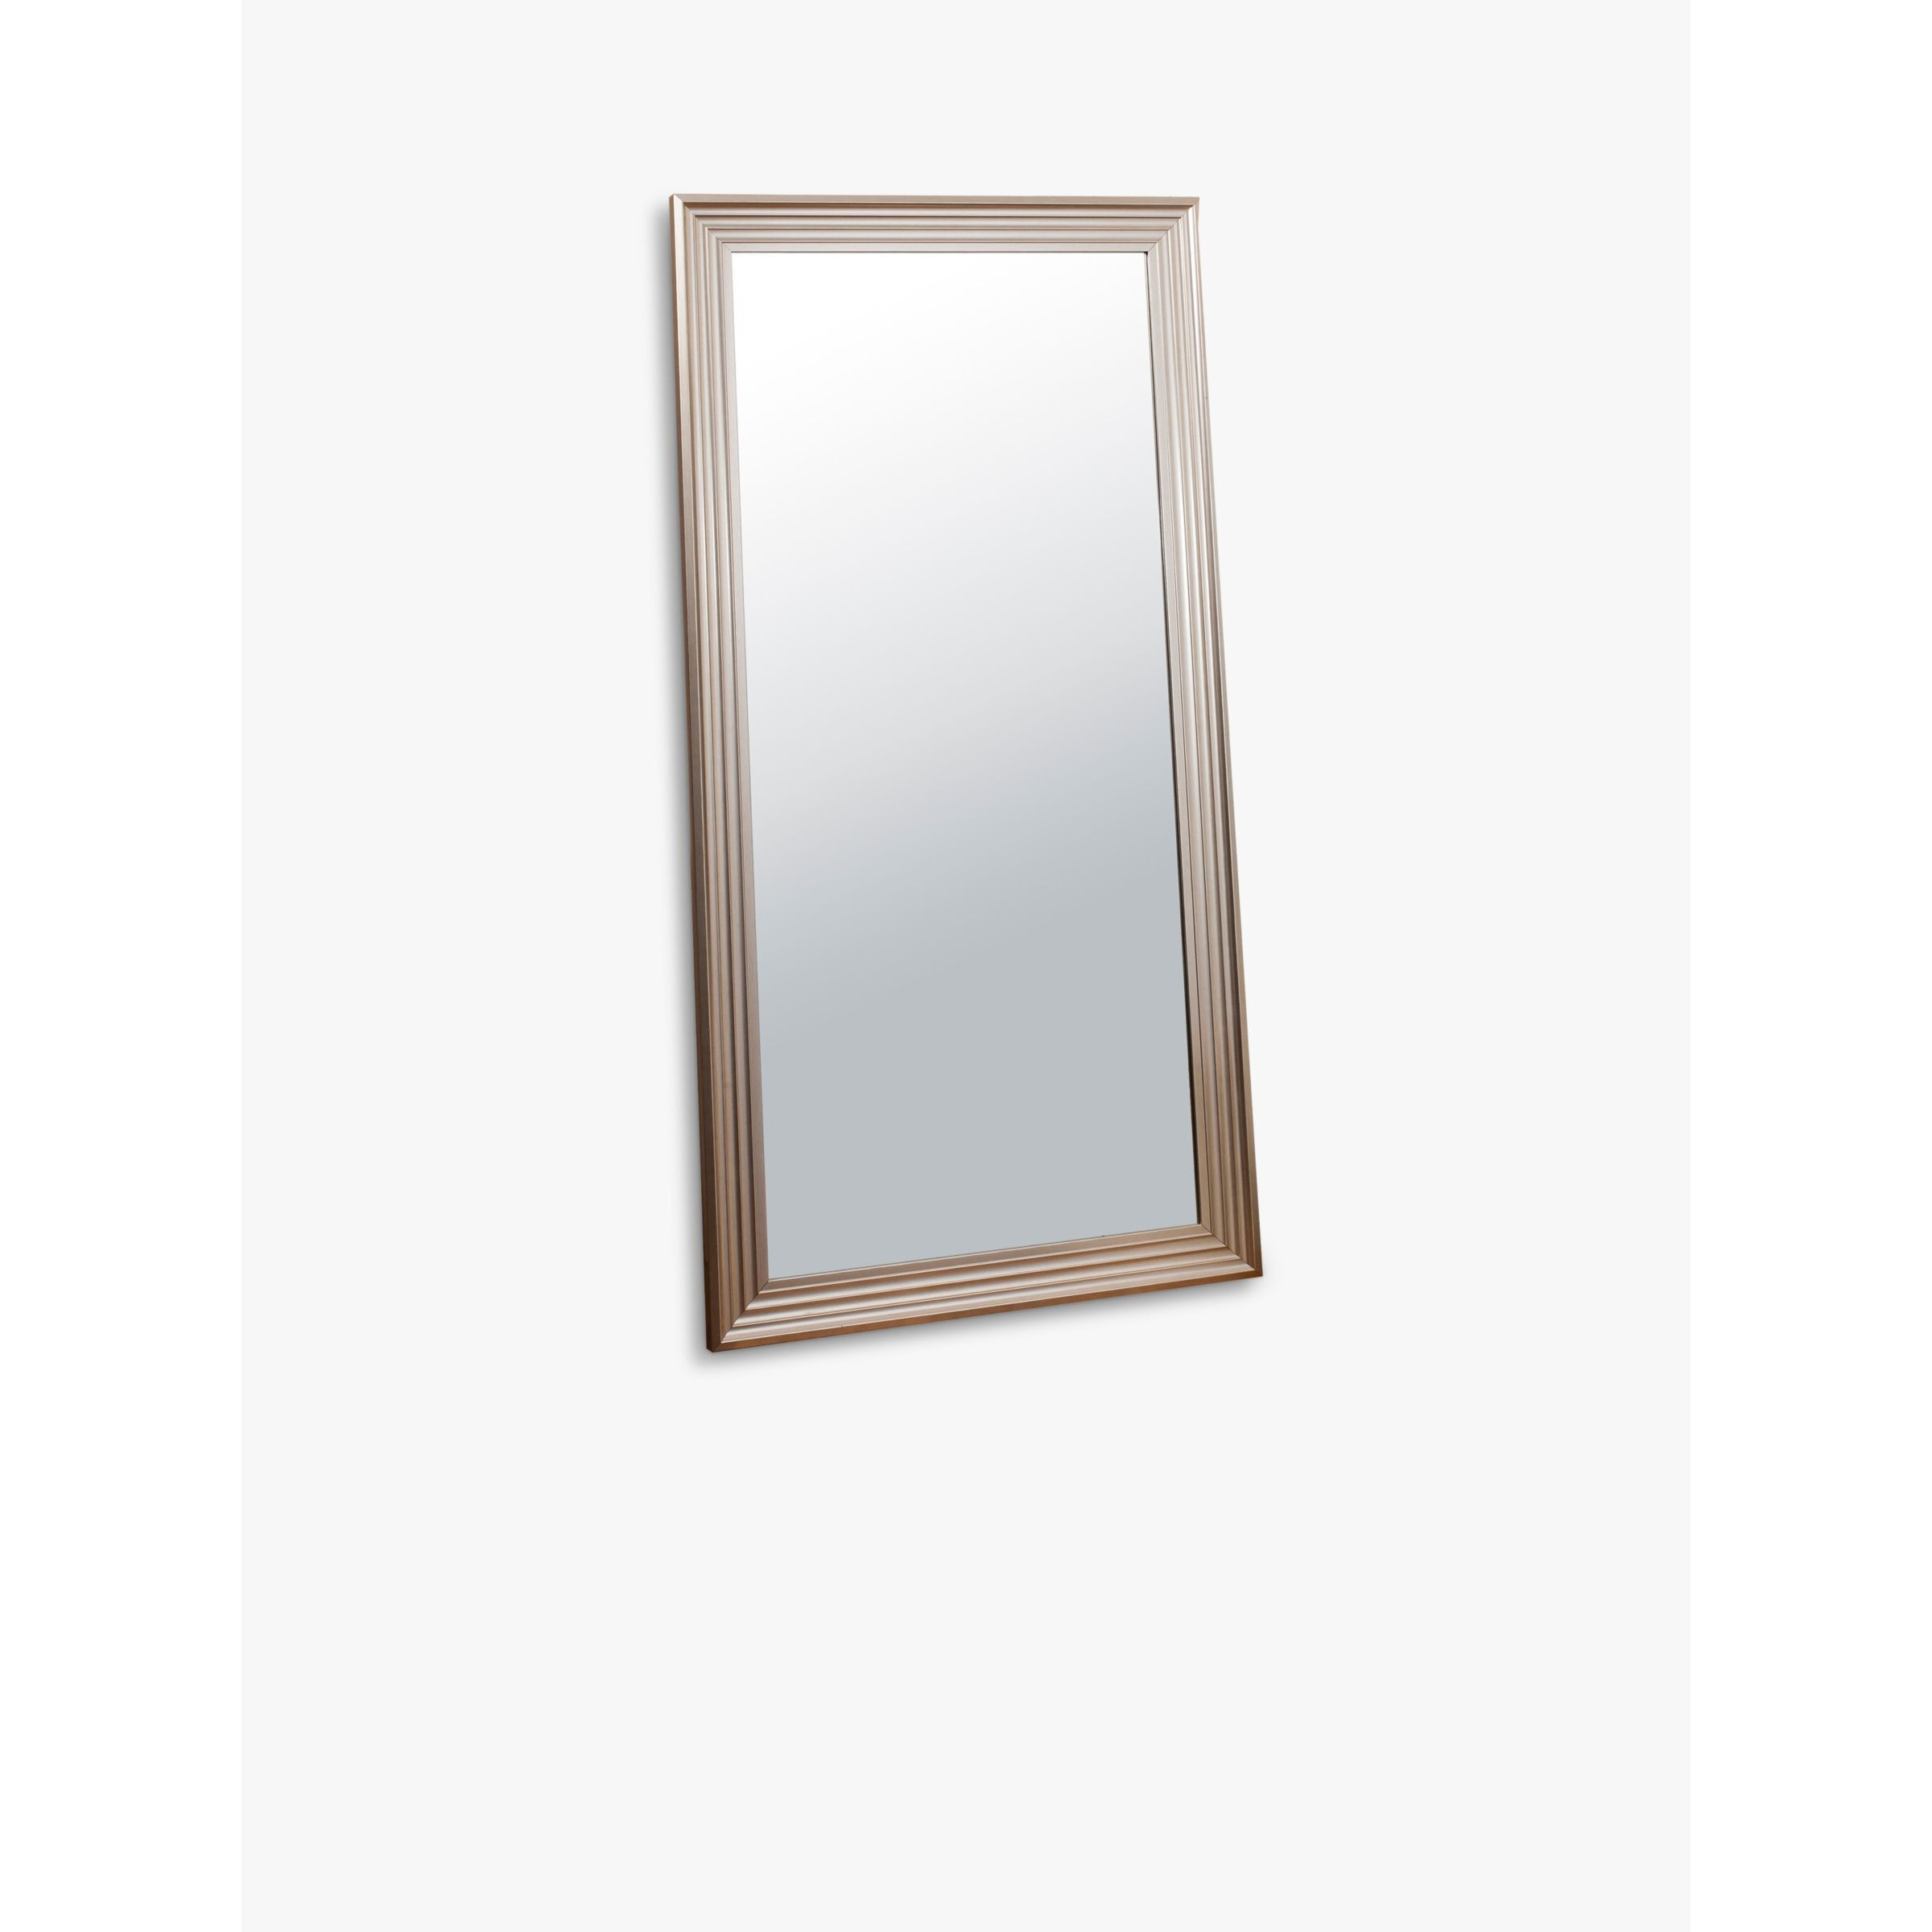 Gallery Direct Jackson Rectangular Leaner / Wall Mirror, 155 x 76cm, Champagne - image 1